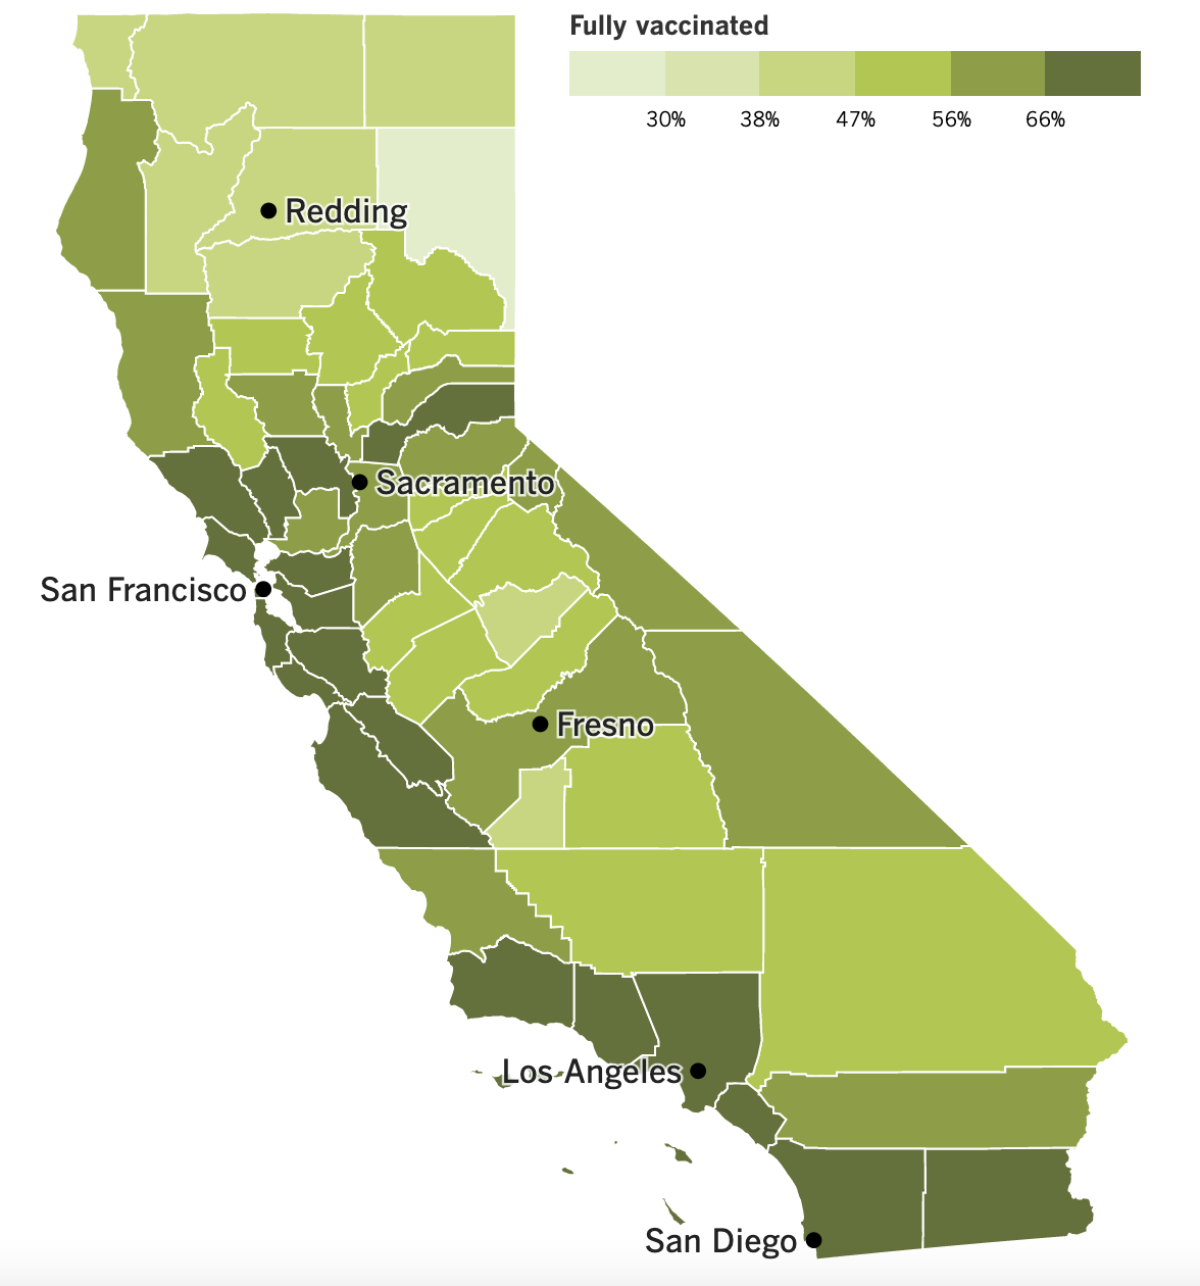 A map that shows California's vaccination progress by county as of Jan. 11.